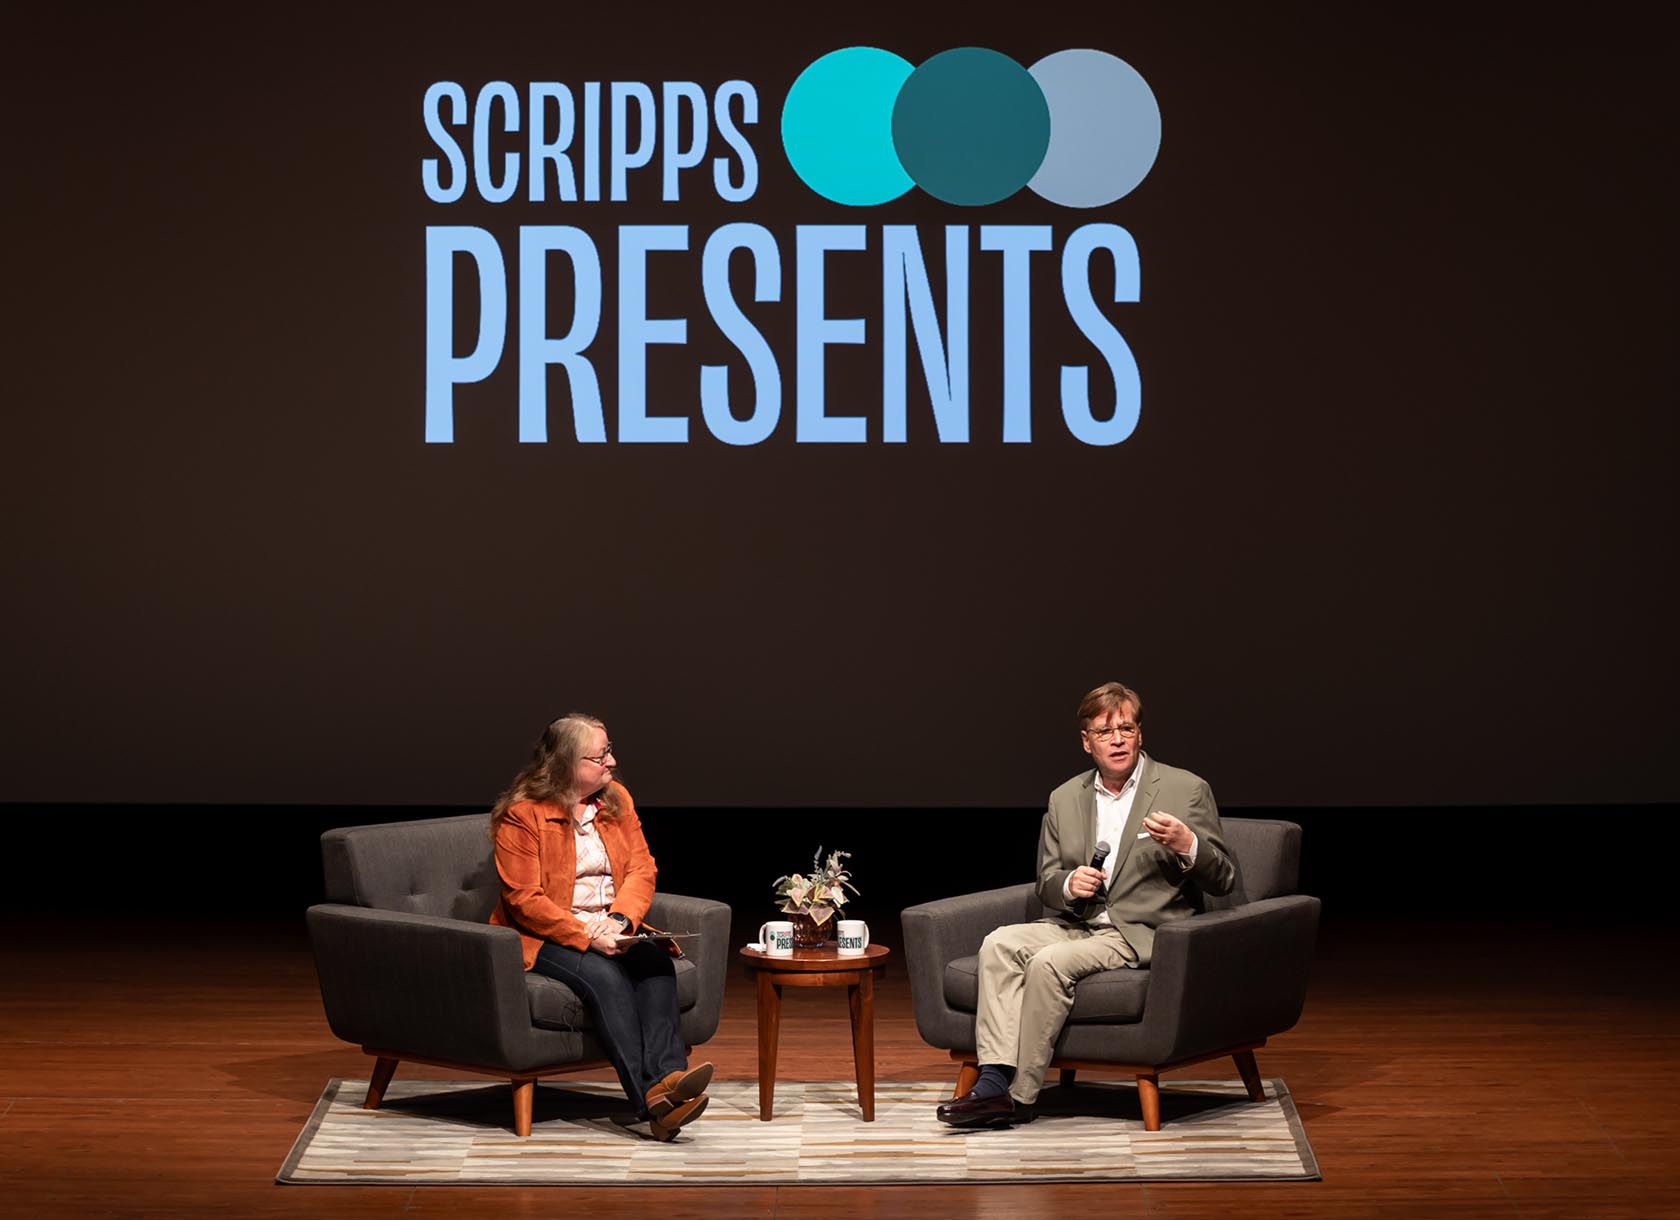 Academy Award–winning writer, director, and playwright Aaron Sorkin (right) in conversation with beloved theater educator Krista Carson Elhai (left) during a Scripps Presents event.